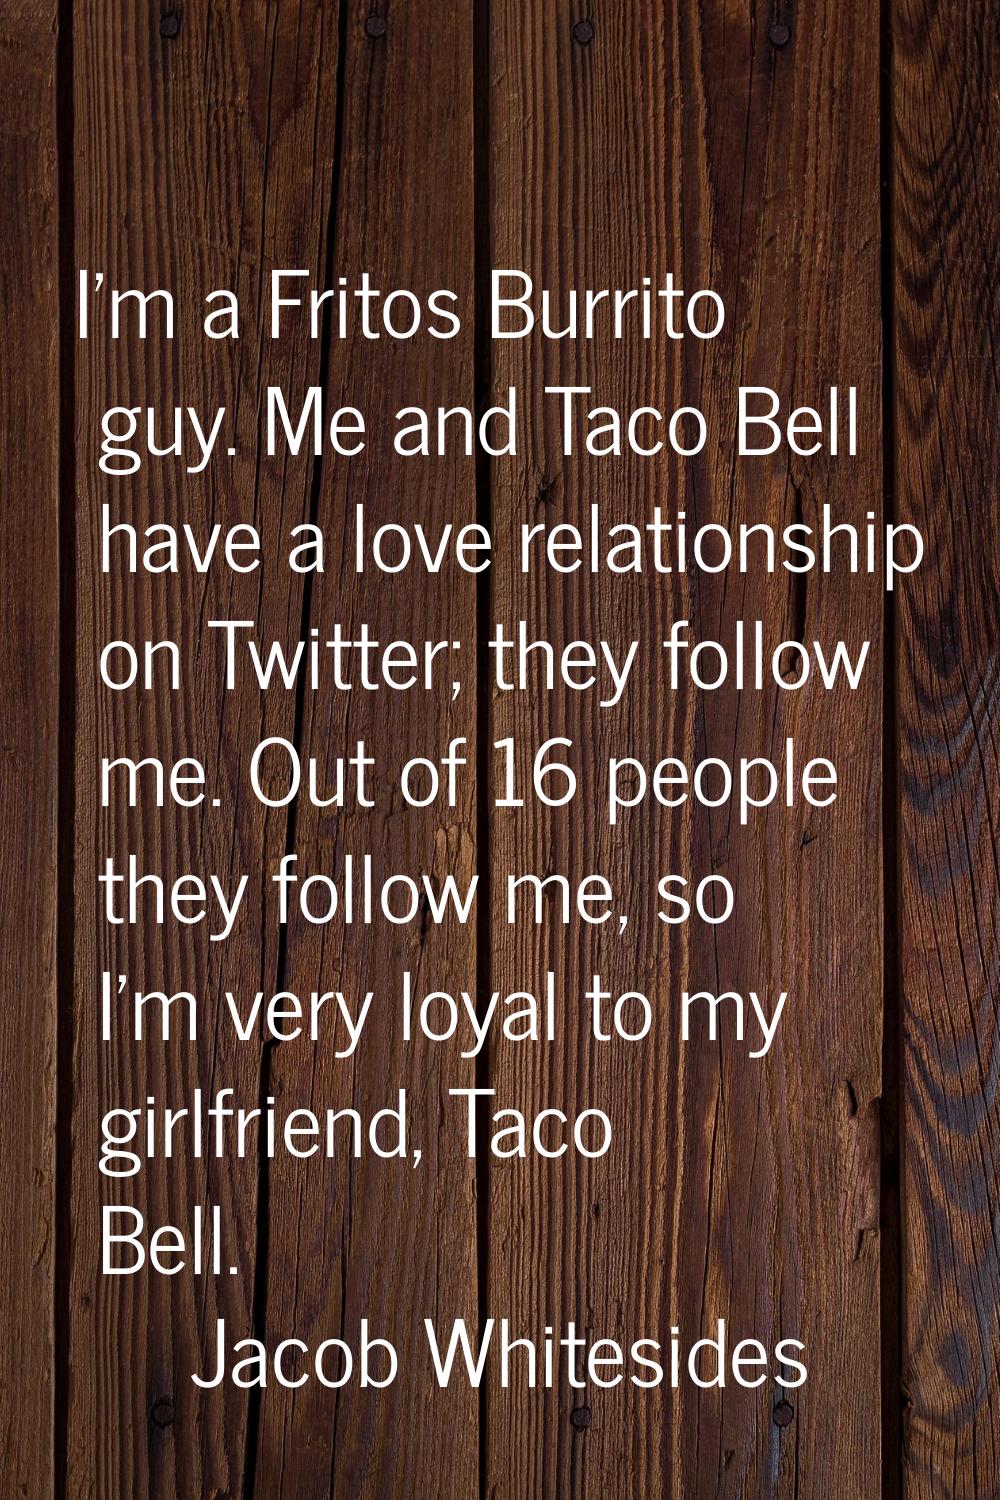 I'm a Fritos Burrito guy. Me and Taco Bell have a love relationship on Twitter; they follow me. Out